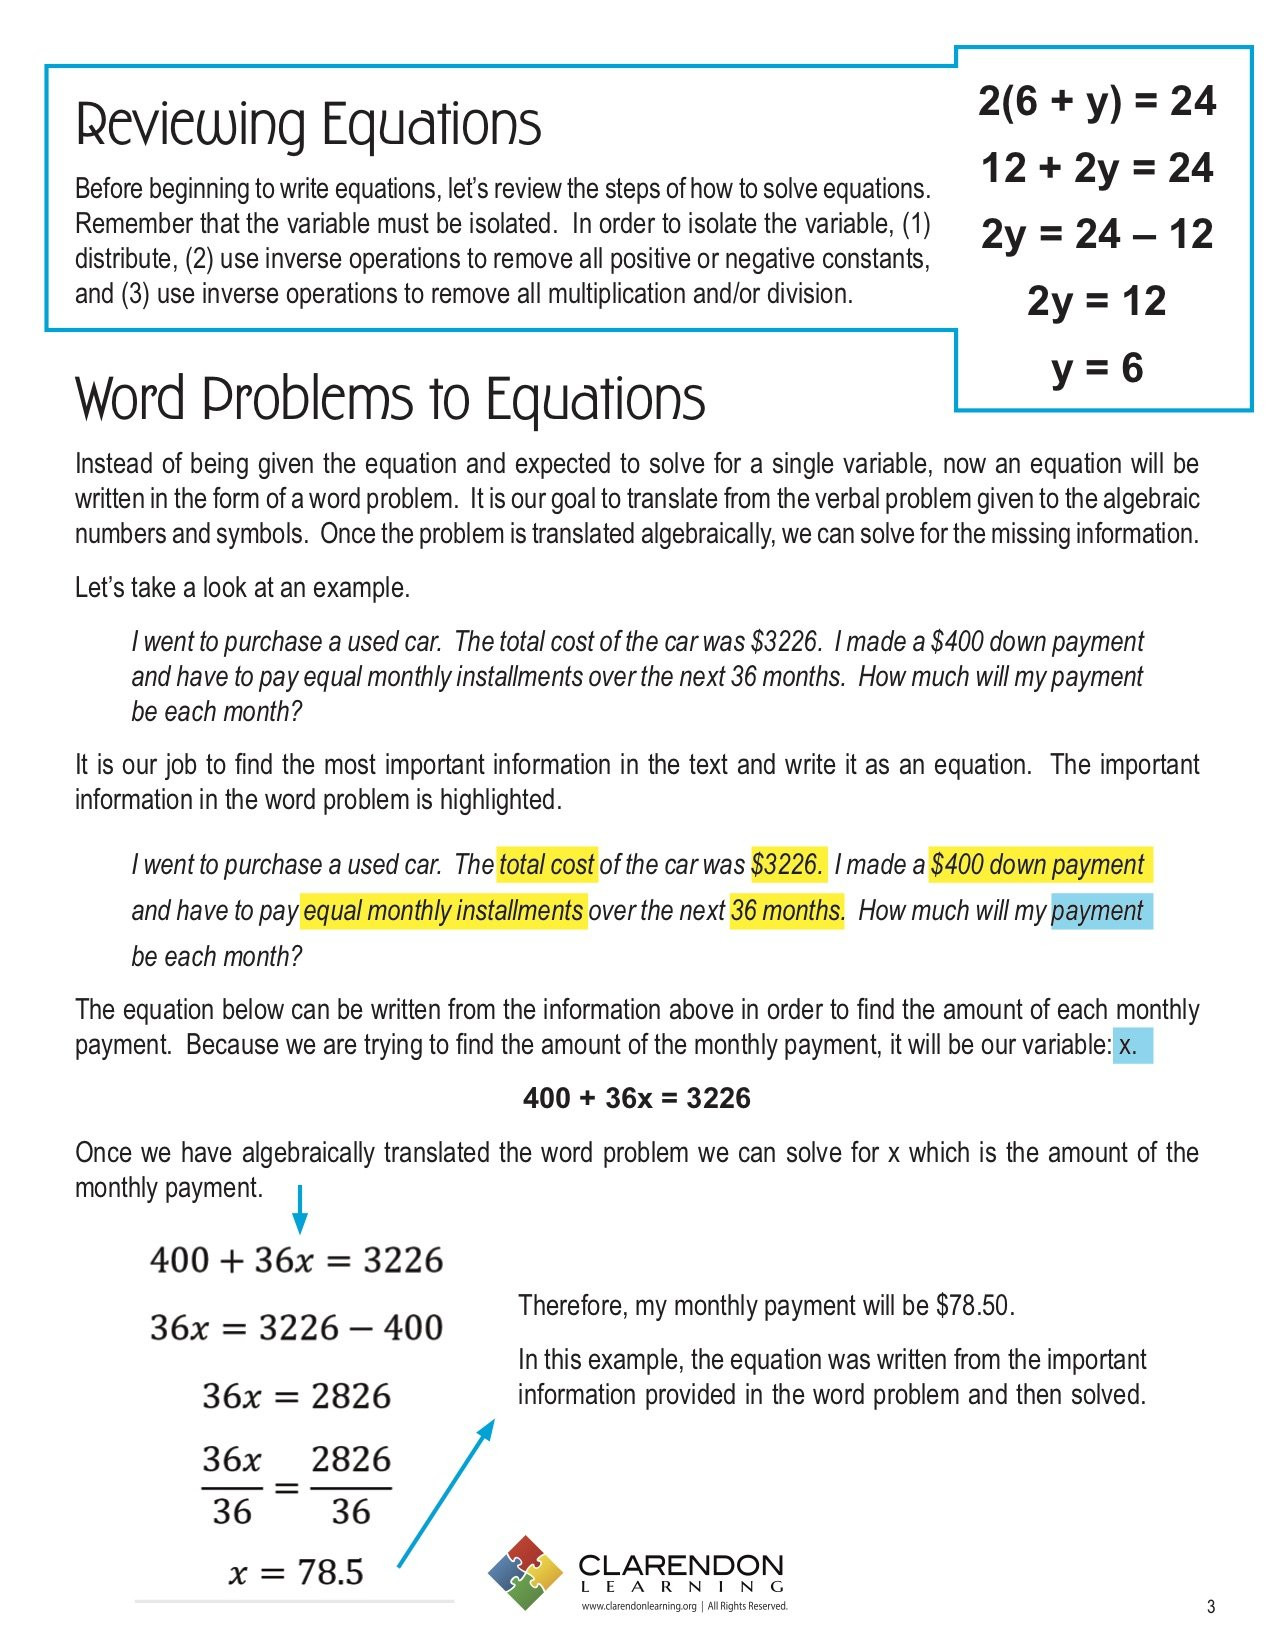 Solving Equations Word Problems Worksheet Word Problems and Equations